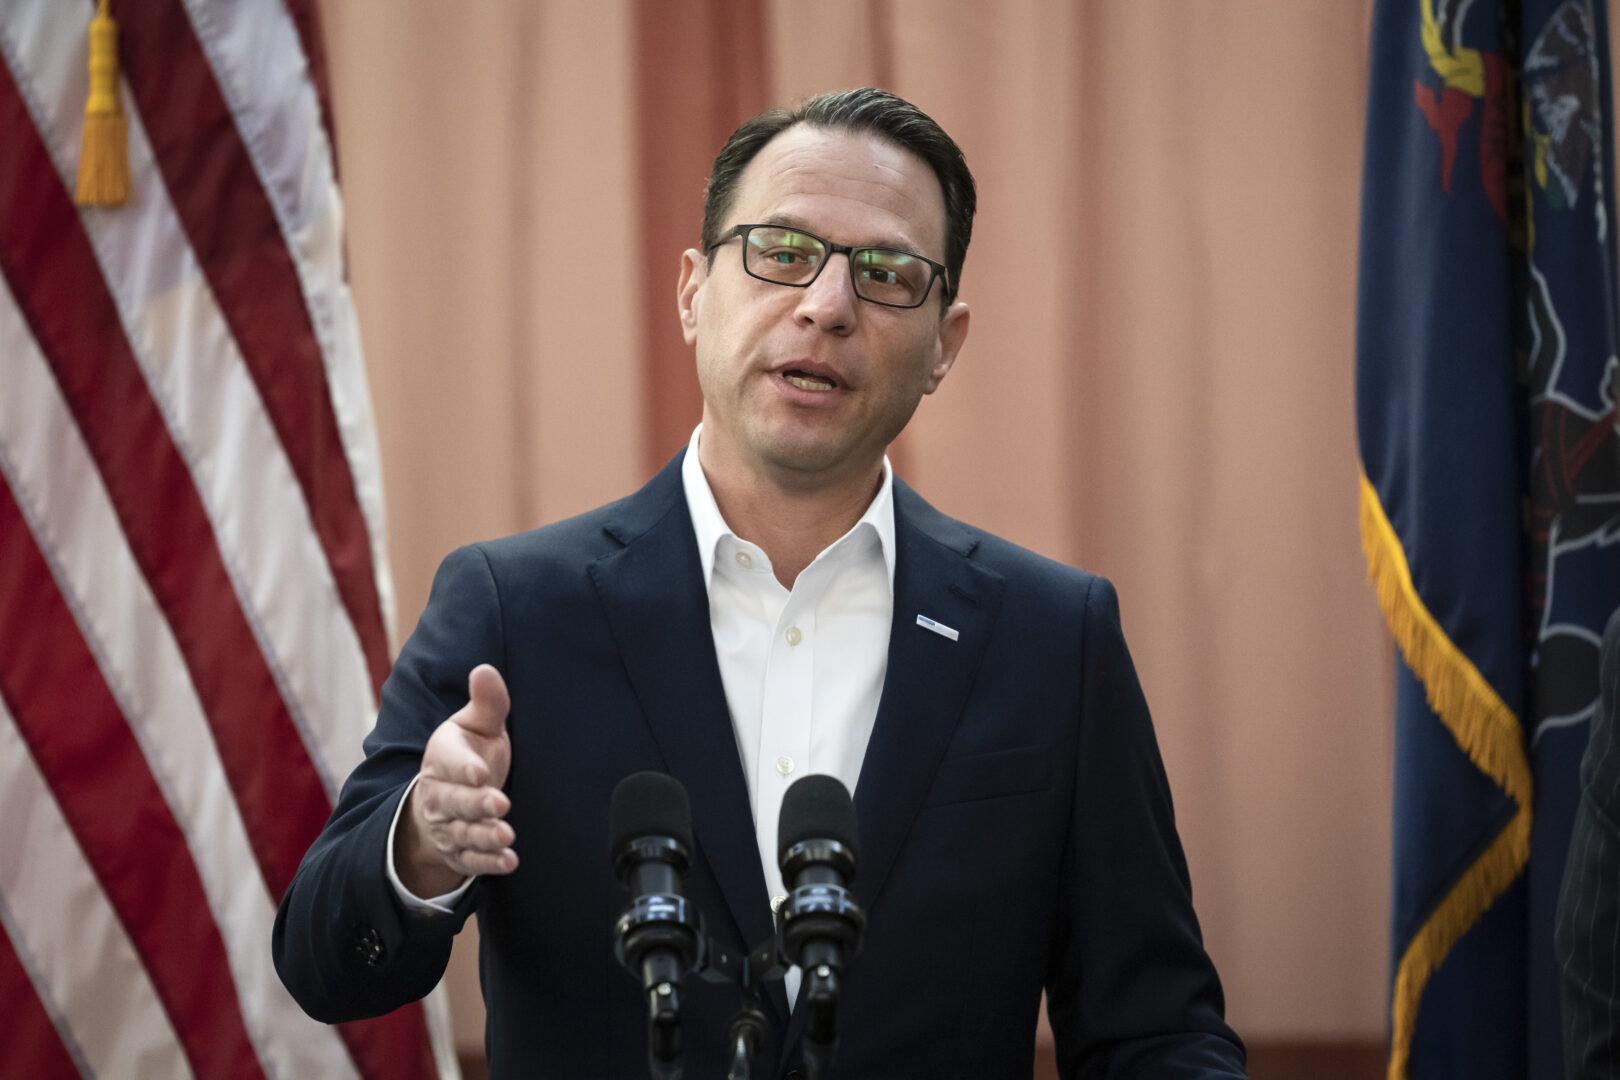 Pennsylvania Democratic Gov. Josh Shapiro speaks during a news conference in Philadelphia, Thursday, Feb. 16, 2023. Shapiro says he won't allow Pennsylvania to execute any inmates while he is in office and calls for the state's lawmakers to repeal the death penalty.